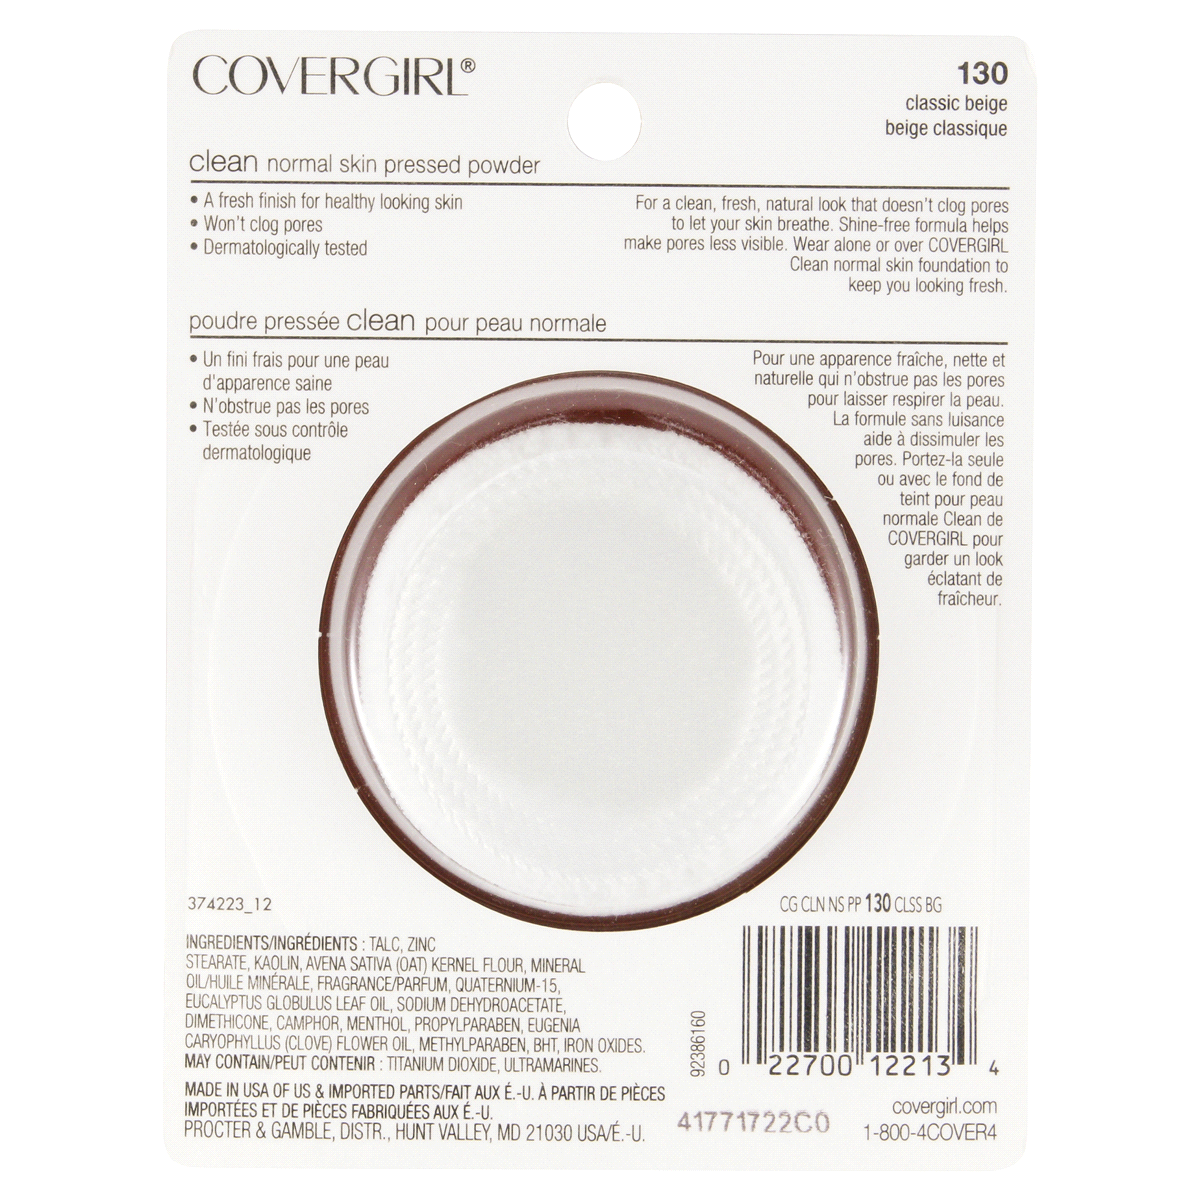 slide 7 of 7, Covergirl COVERGIRL Clean Pressed Powder Classic Beige 130, 11 G 0.39 OZ, 1 ct